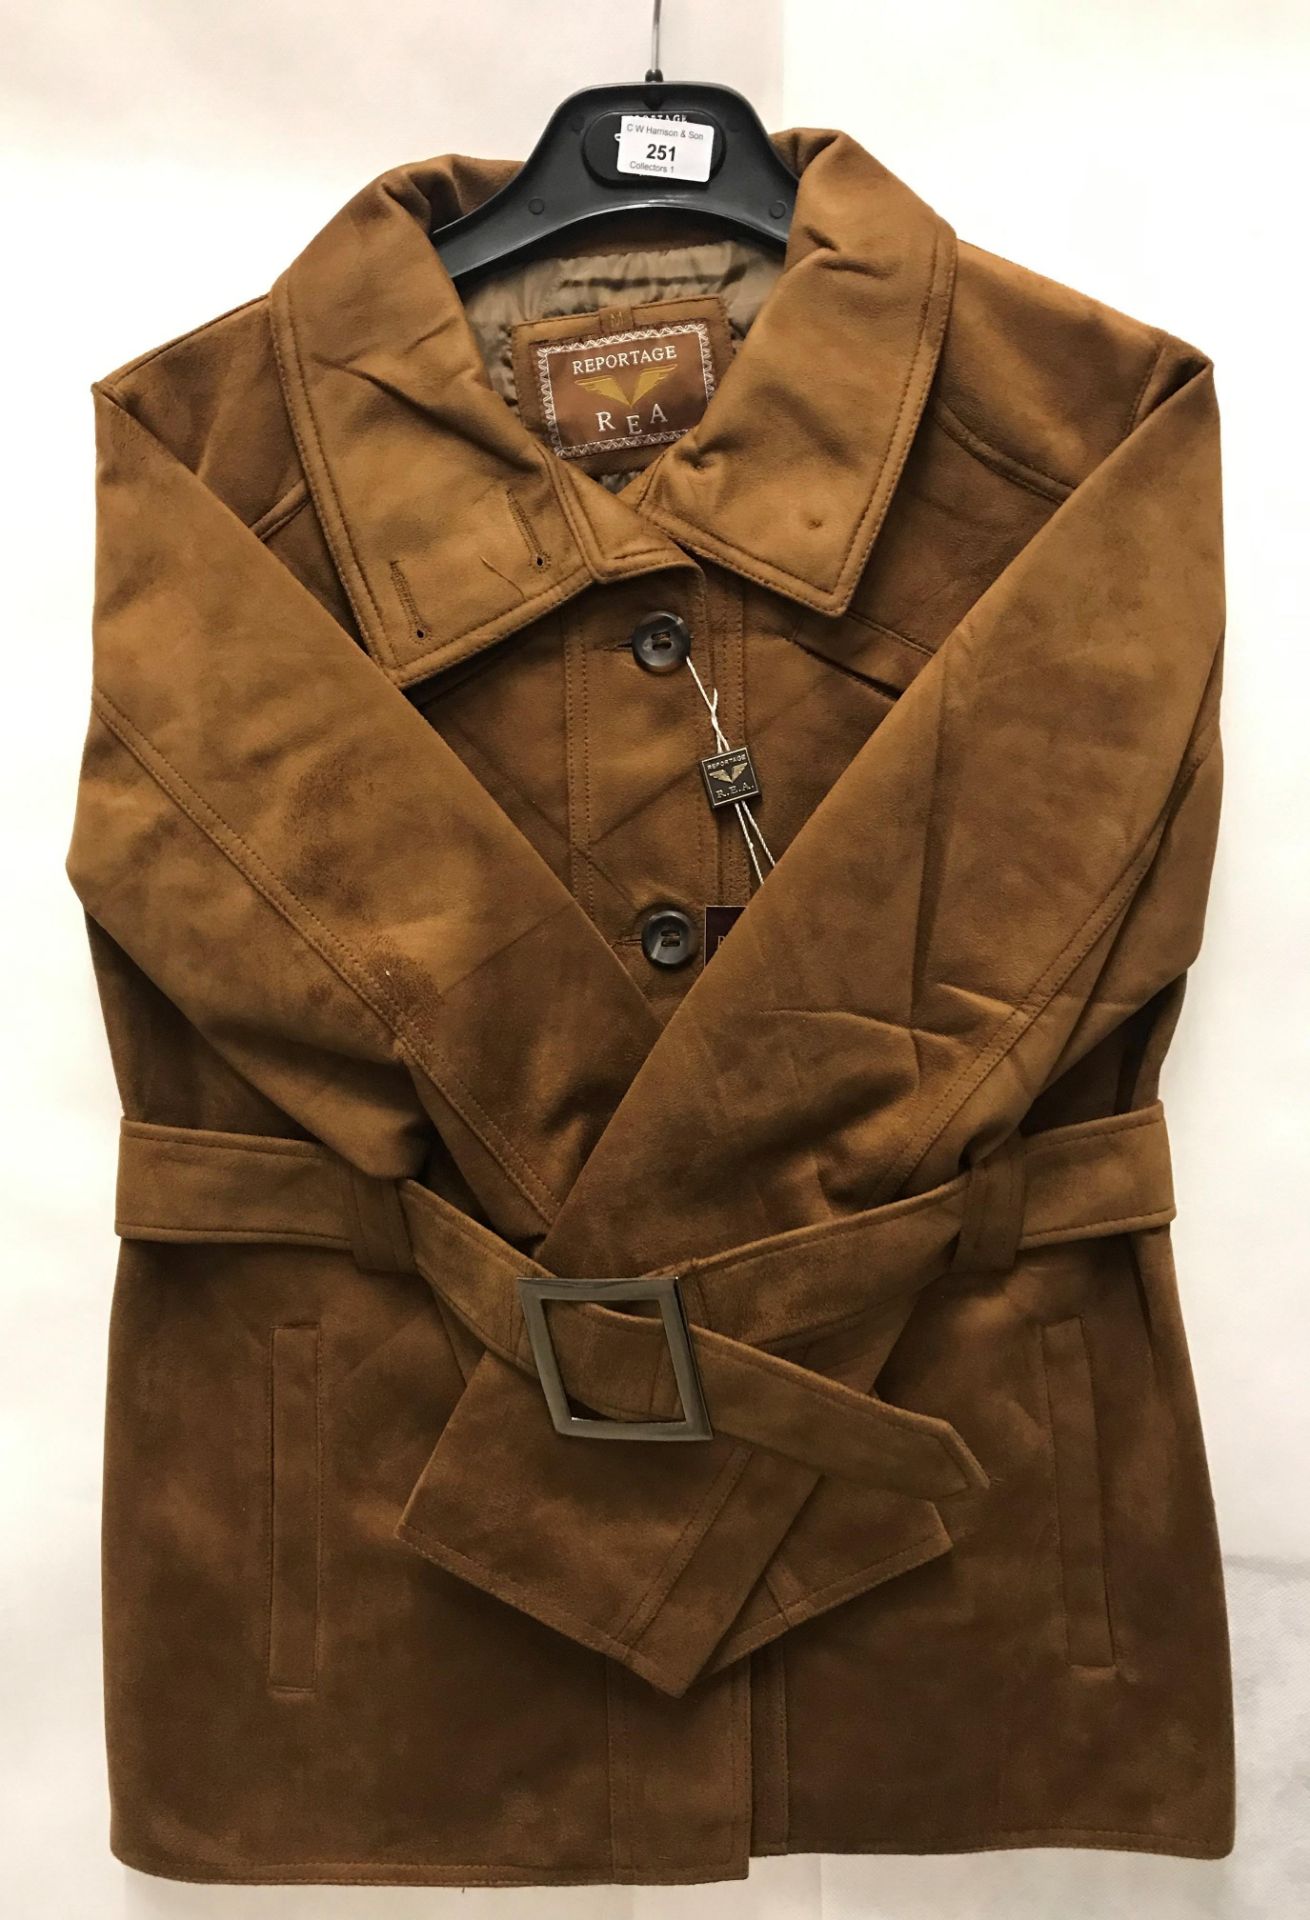 A Reportage light brown suede men's coat complete with belt (size M)